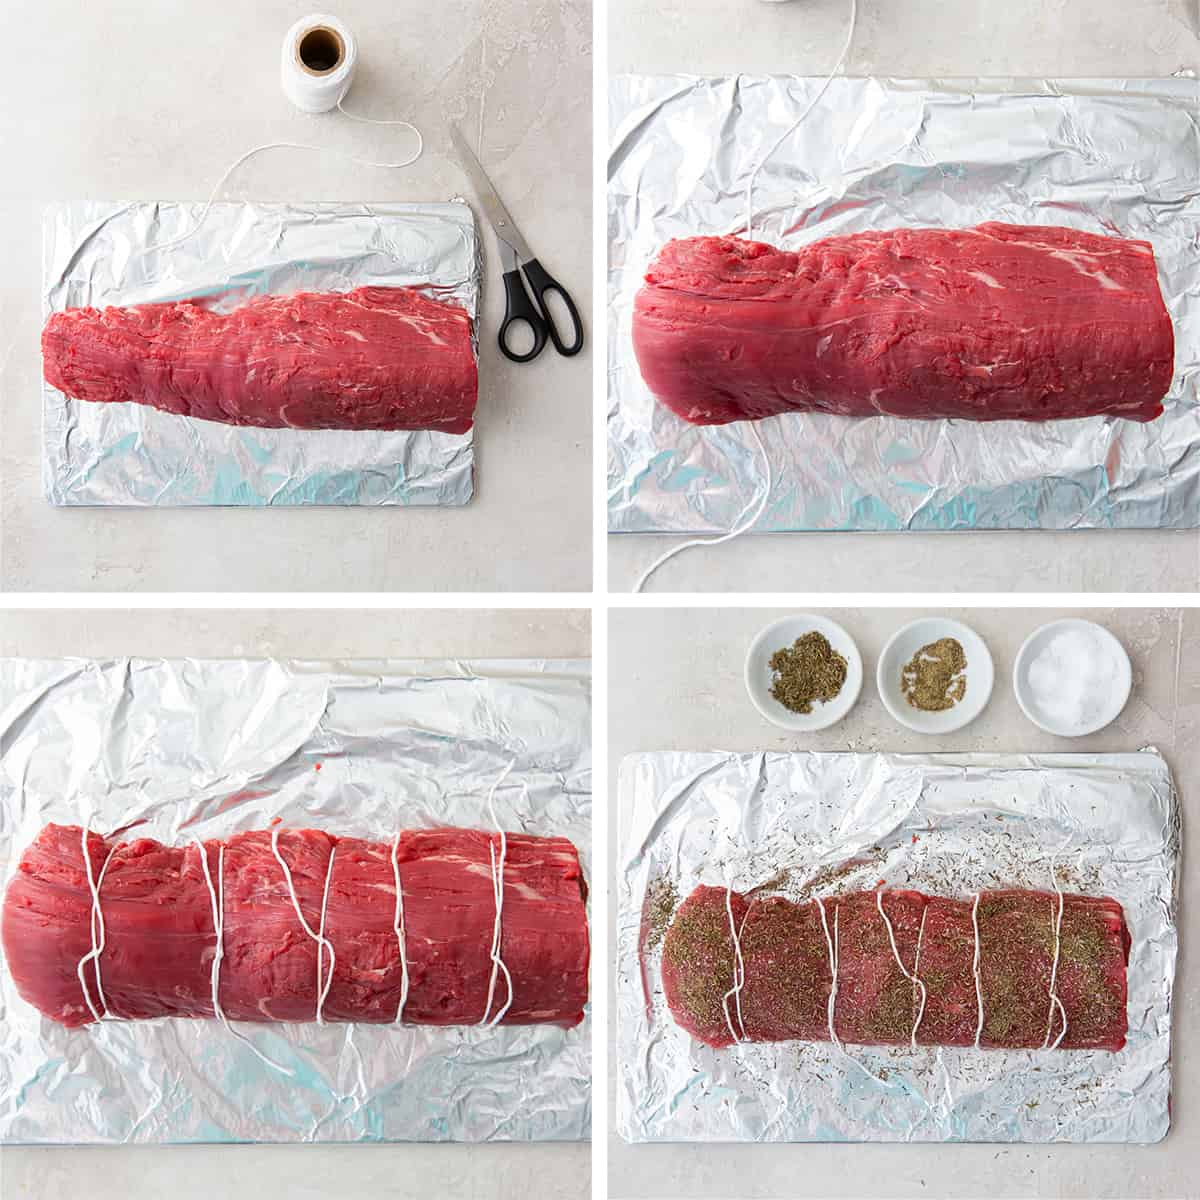 A beef tenderloin tied with kitchen twine and seasoned.